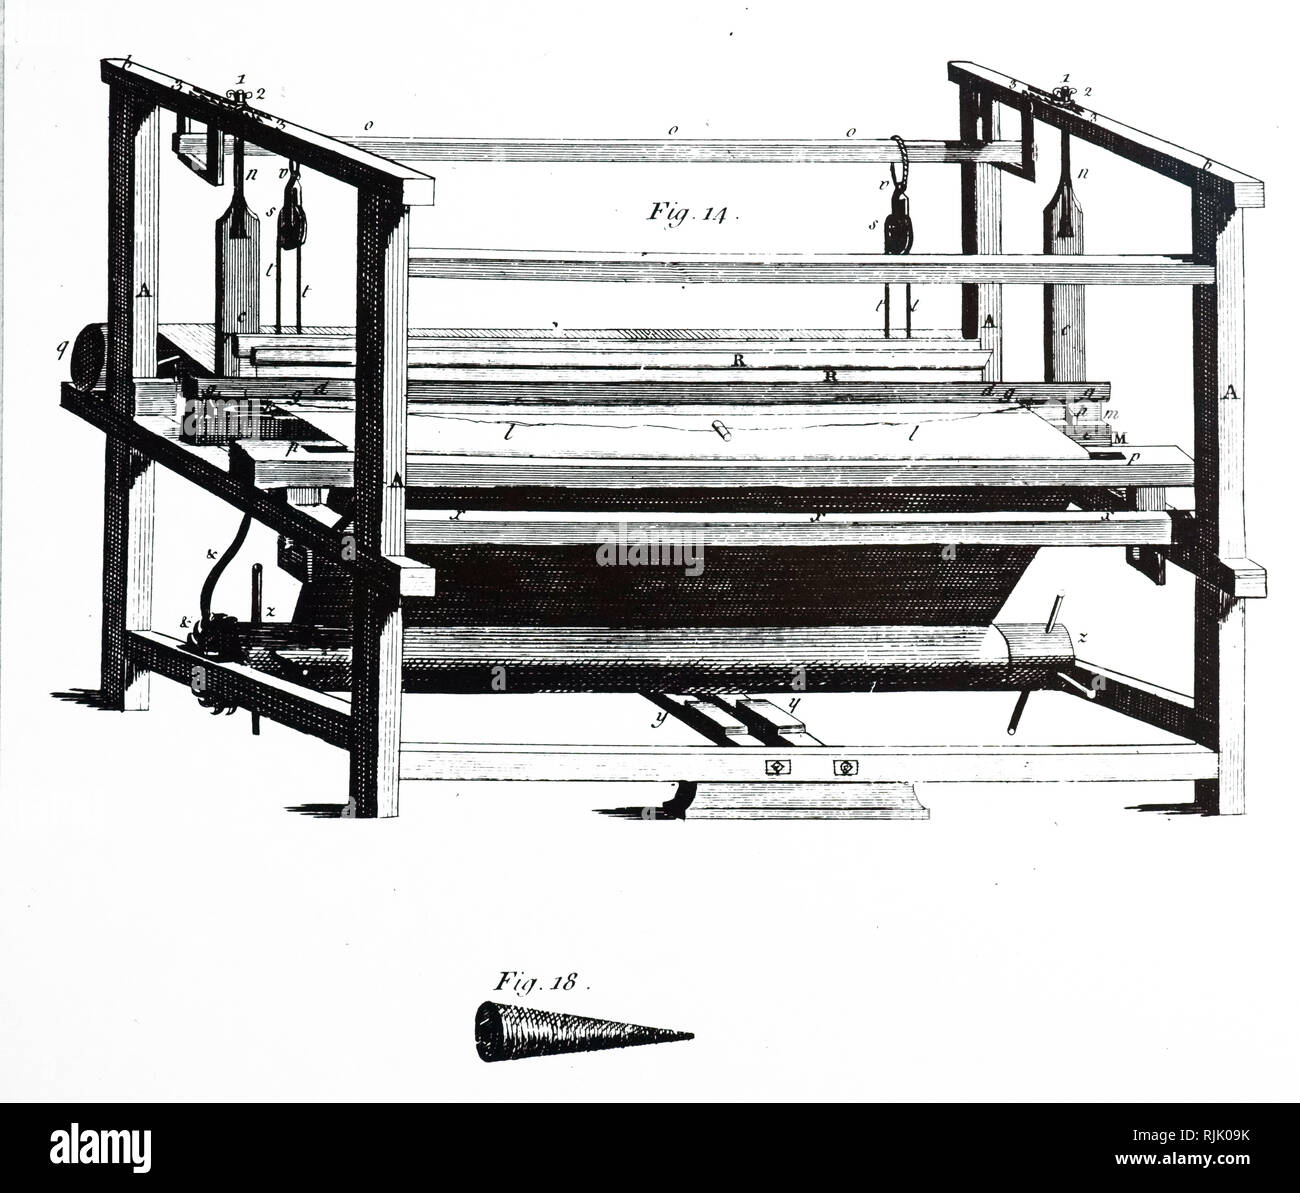 An engraving depicting a loom for weaving woollen cloth. Dated 18th century Stock Photo